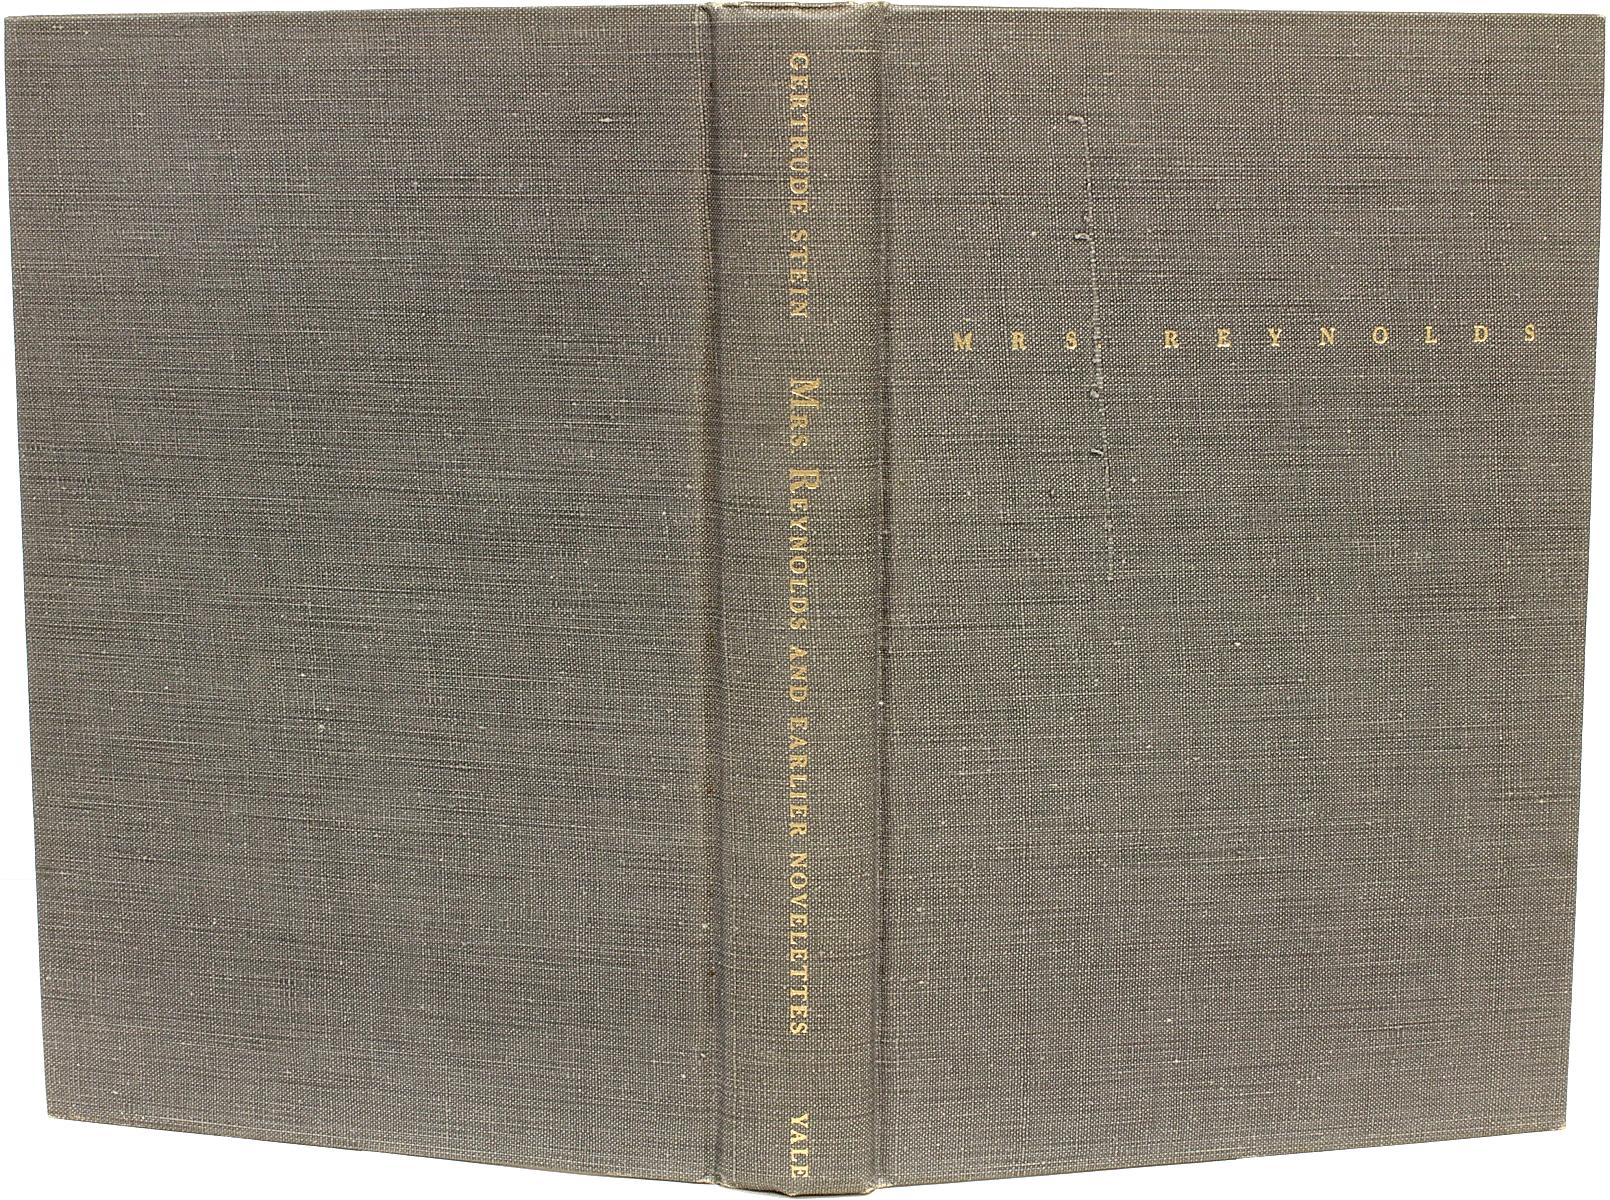 American Gertrude Stein, Mrs. Reynolds. Inscribed by Alice Toklas, First Edition 1952 For Sale